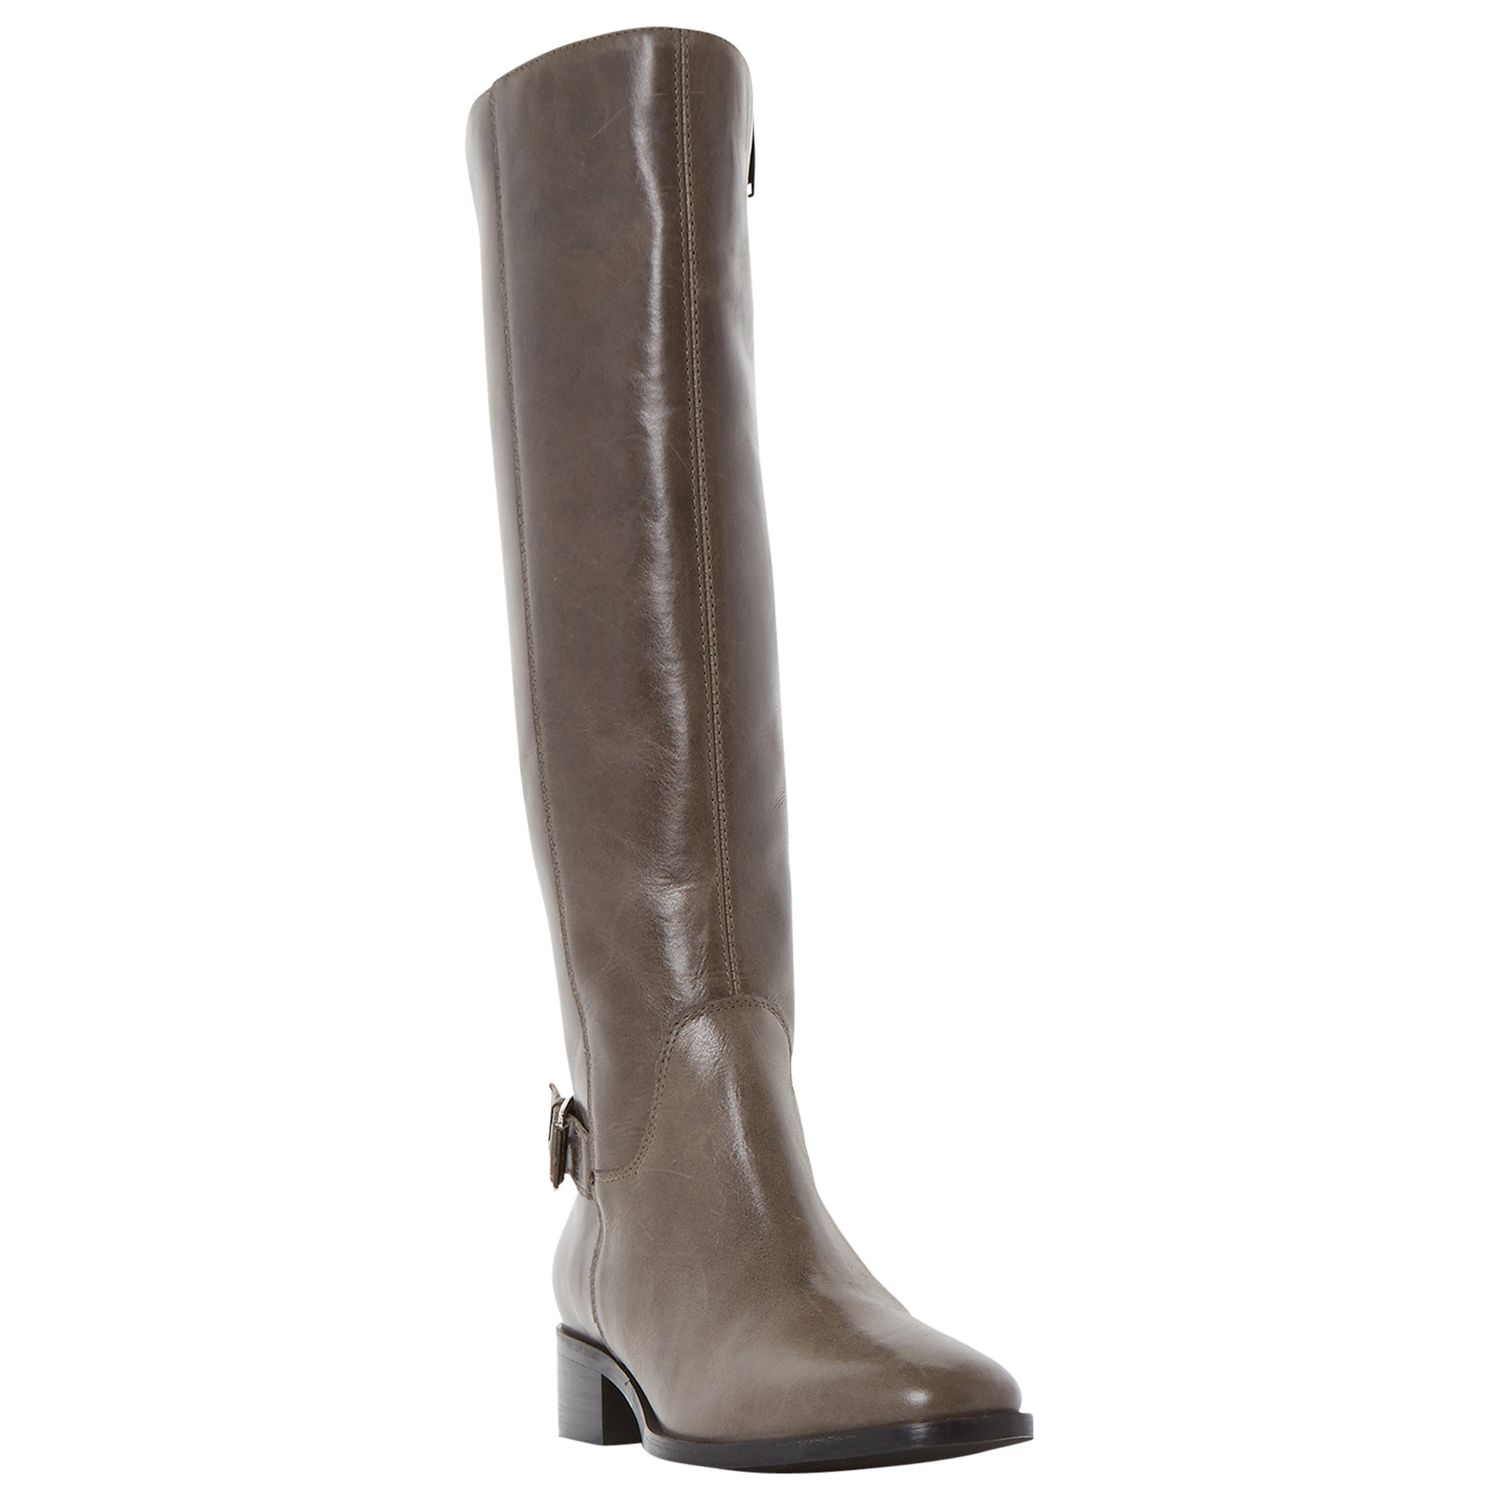 Dune Vinny Side Zip Buckle Detail Riding Boot, Grey Leather